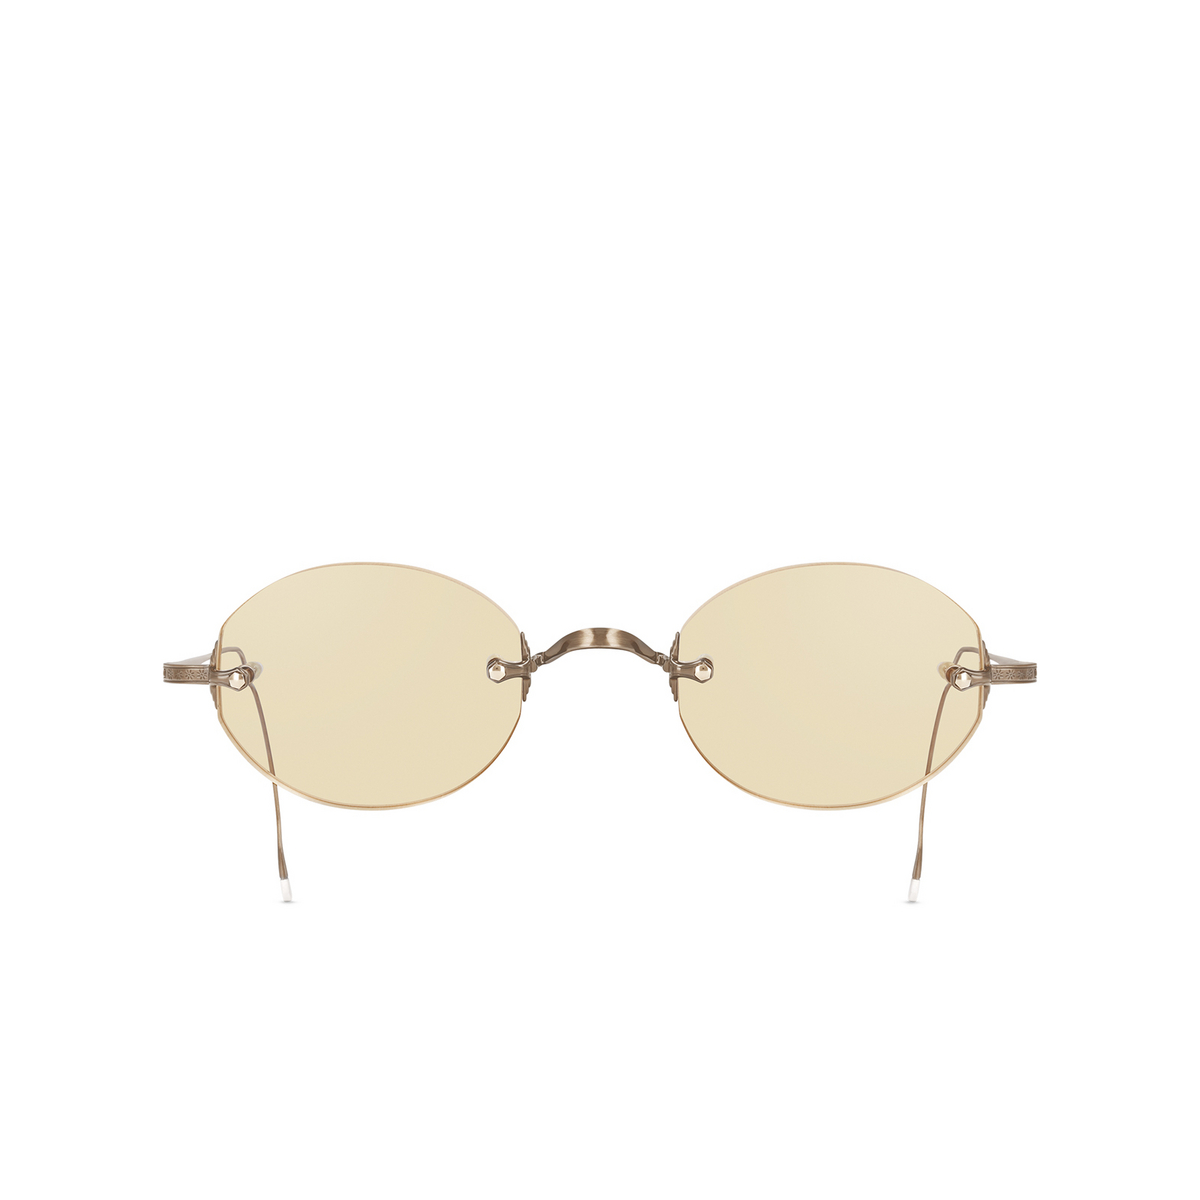 Mr. Leight MAKENA S Sunglasses ATG/BRNWSH Antique Gold - front view